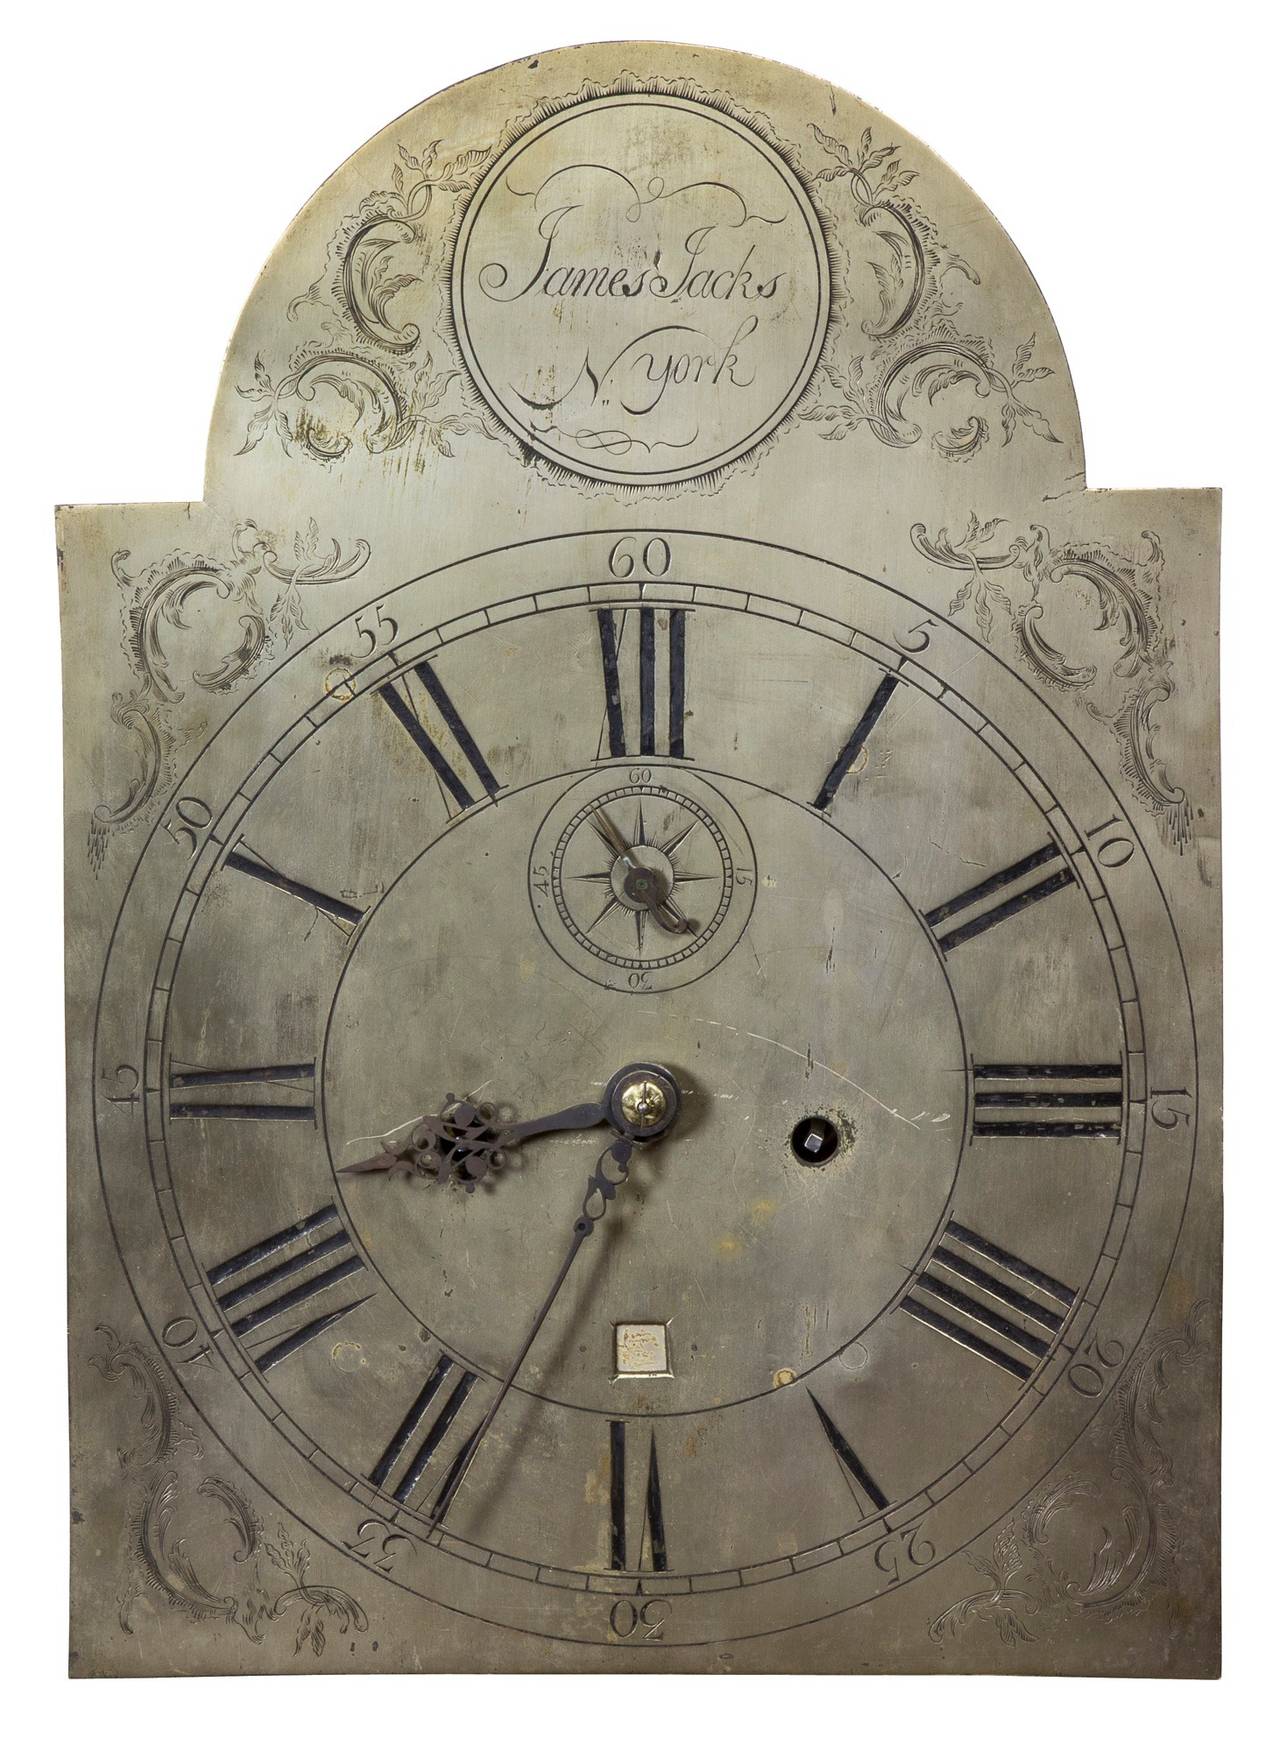 Mahogany Chippendale Clock with Silvered Face by James Jacks, New York In Excellent Condition For Sale In Providence, RI